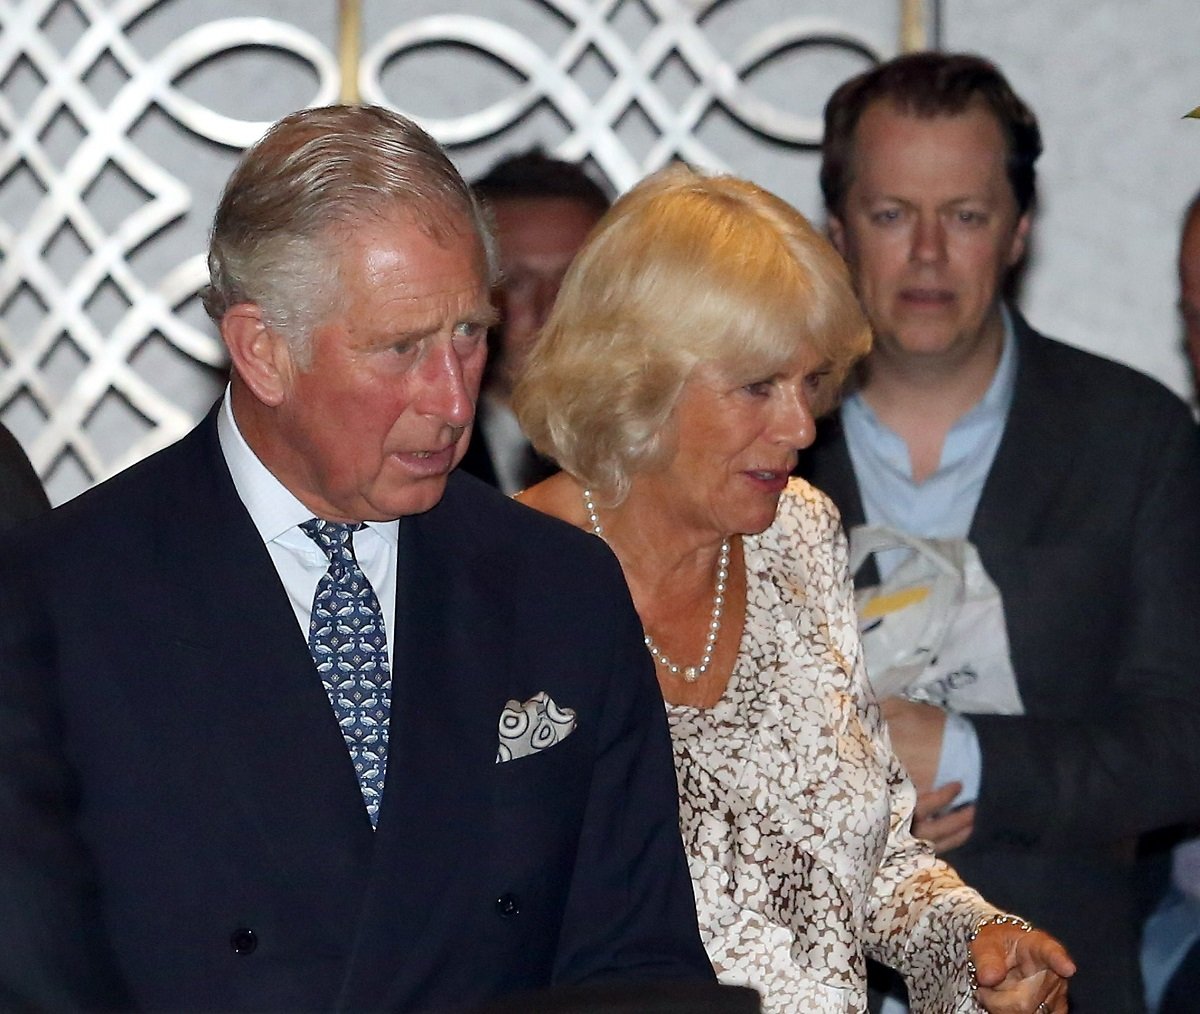 Prince Charles, Camilla Parker Bowles, and Tom Parker Bowles leaving Scott's restaurant together